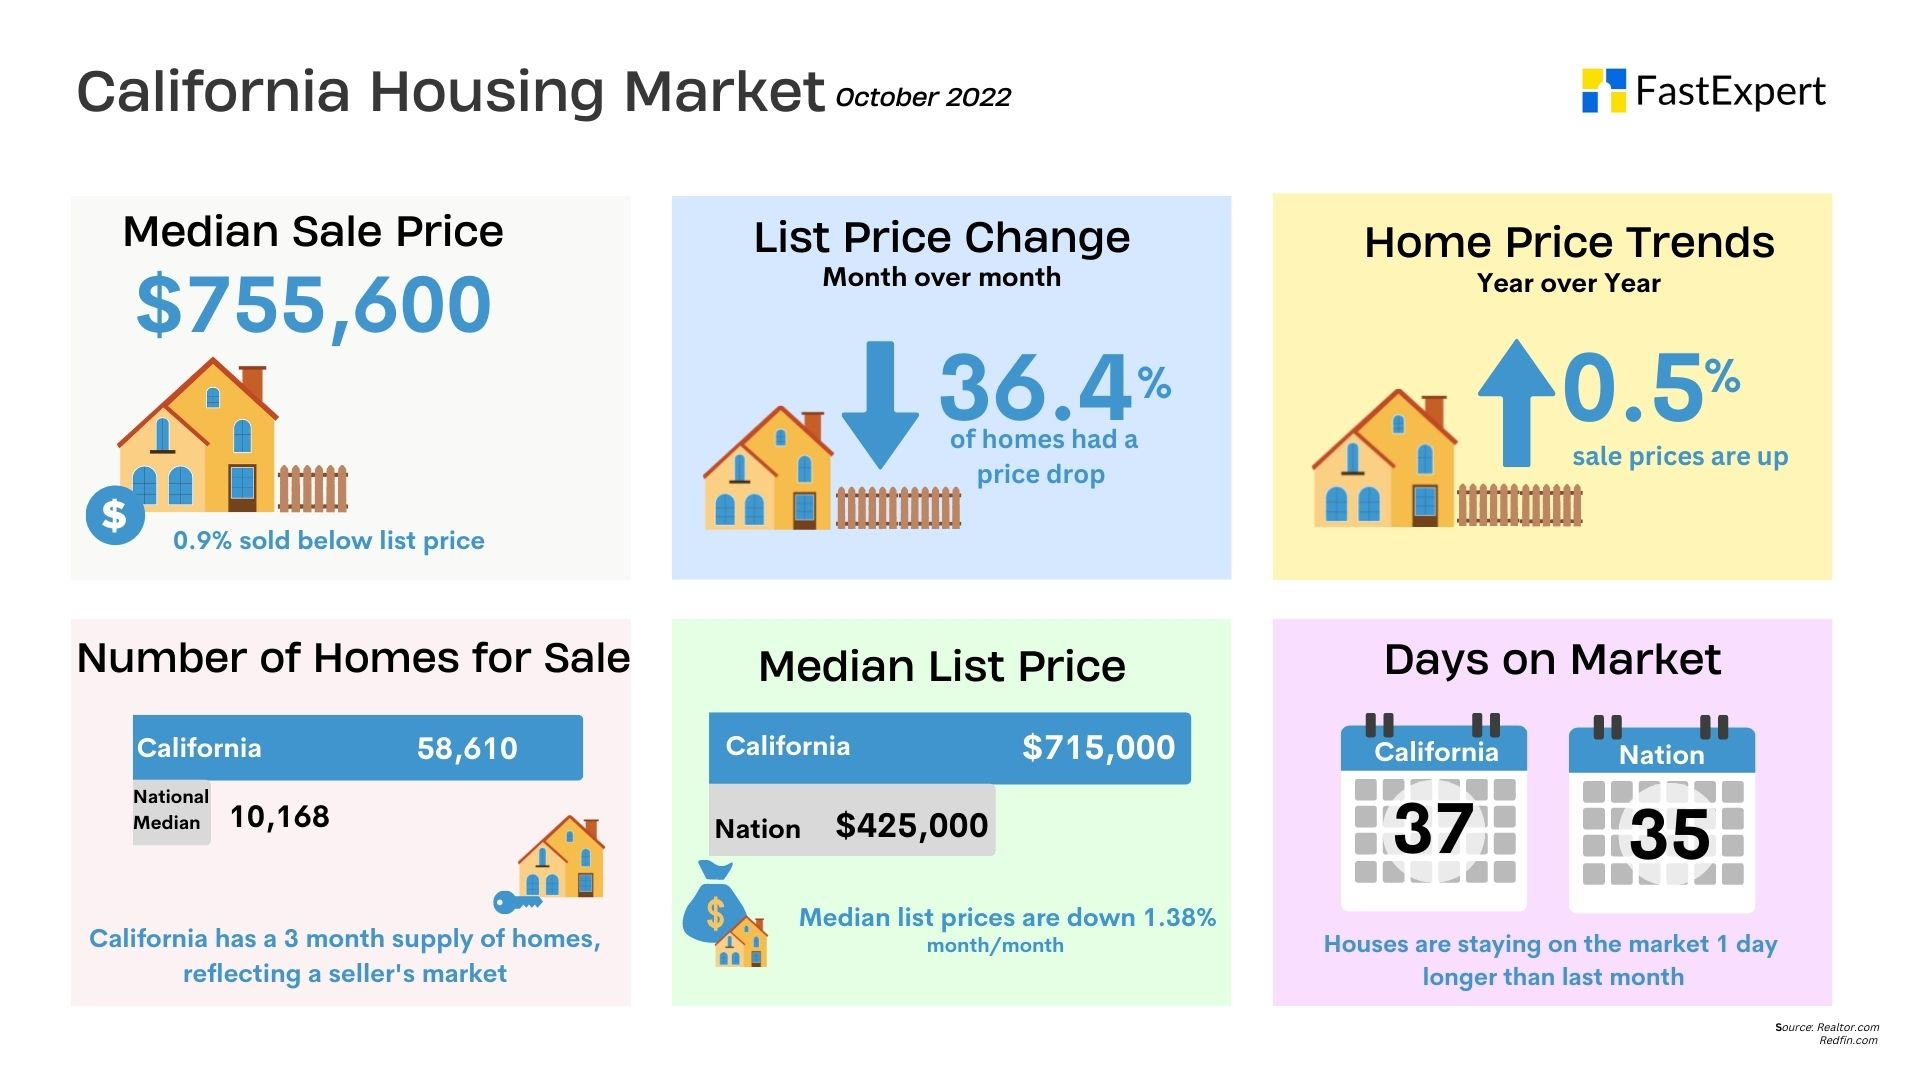 California Housing Market Trends and Predictions (2022)